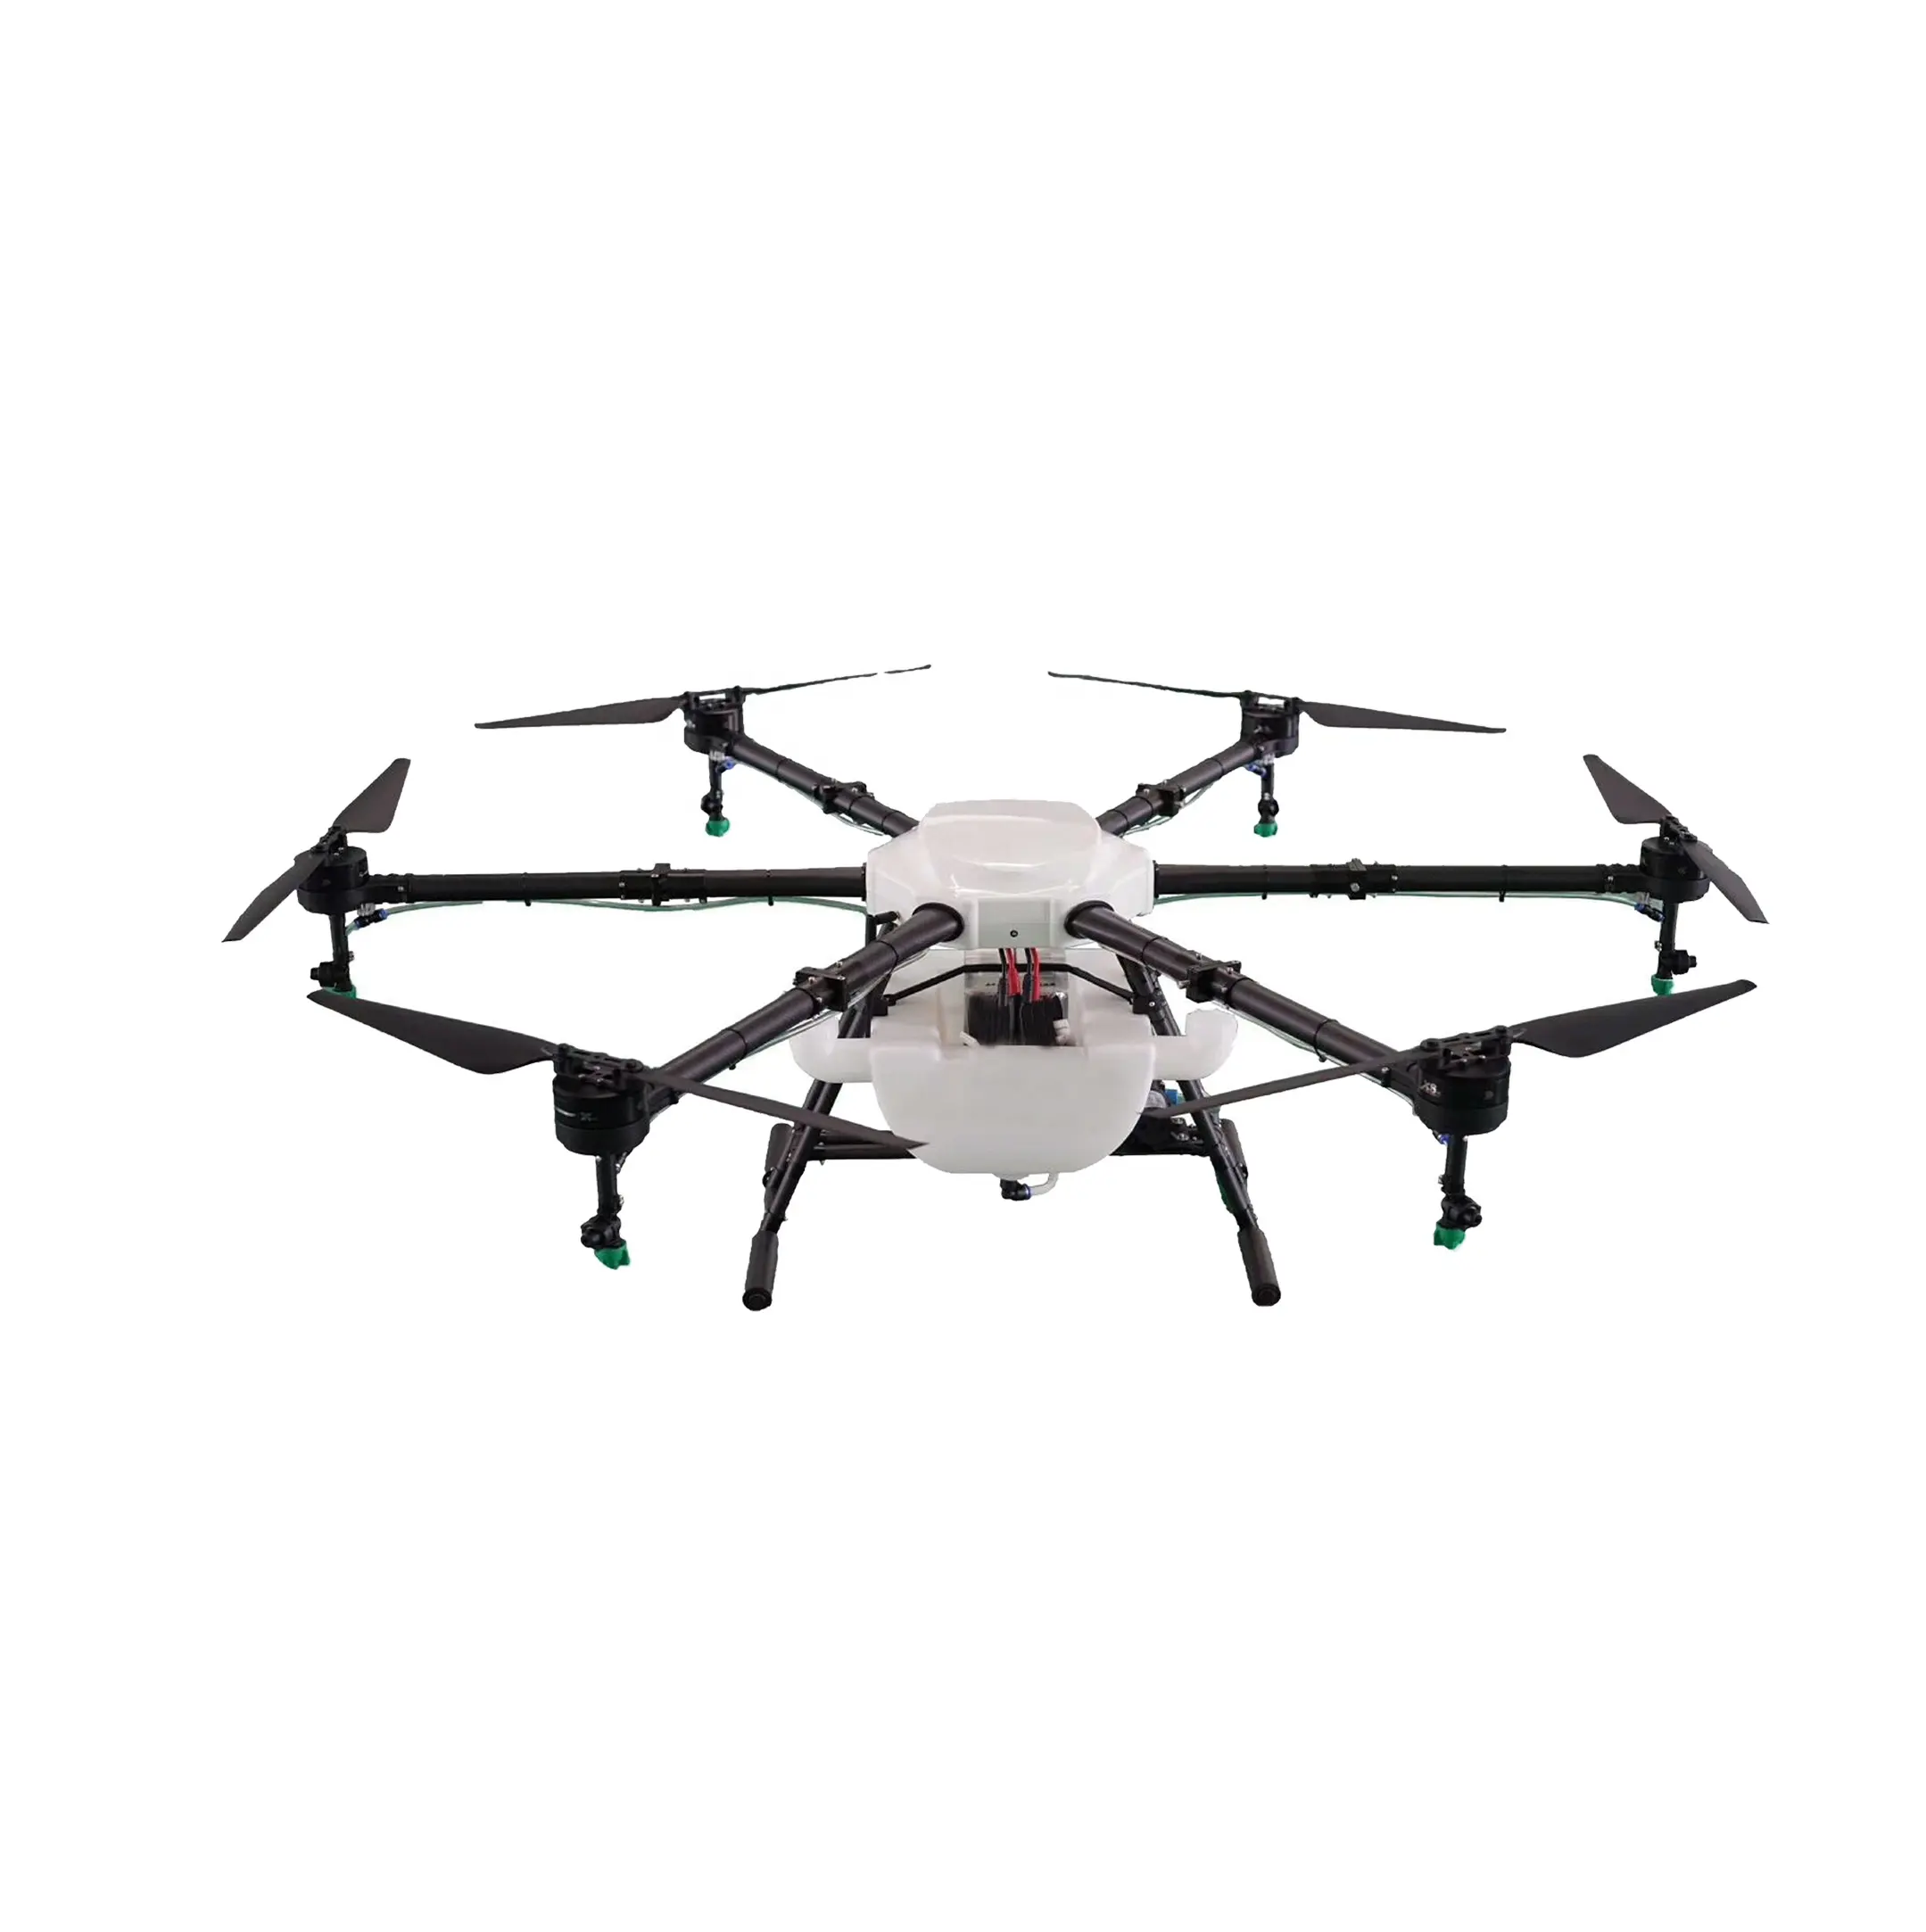 Agras <span class=keywords><strong>T30</strong></span>เครื่องพ่นสารเคมี UAV Dron Agricola,<span class=keywords><strong>T30</strong></span>เกษตร Drone Agras <span class=keywords><strong>T30</strong></span>